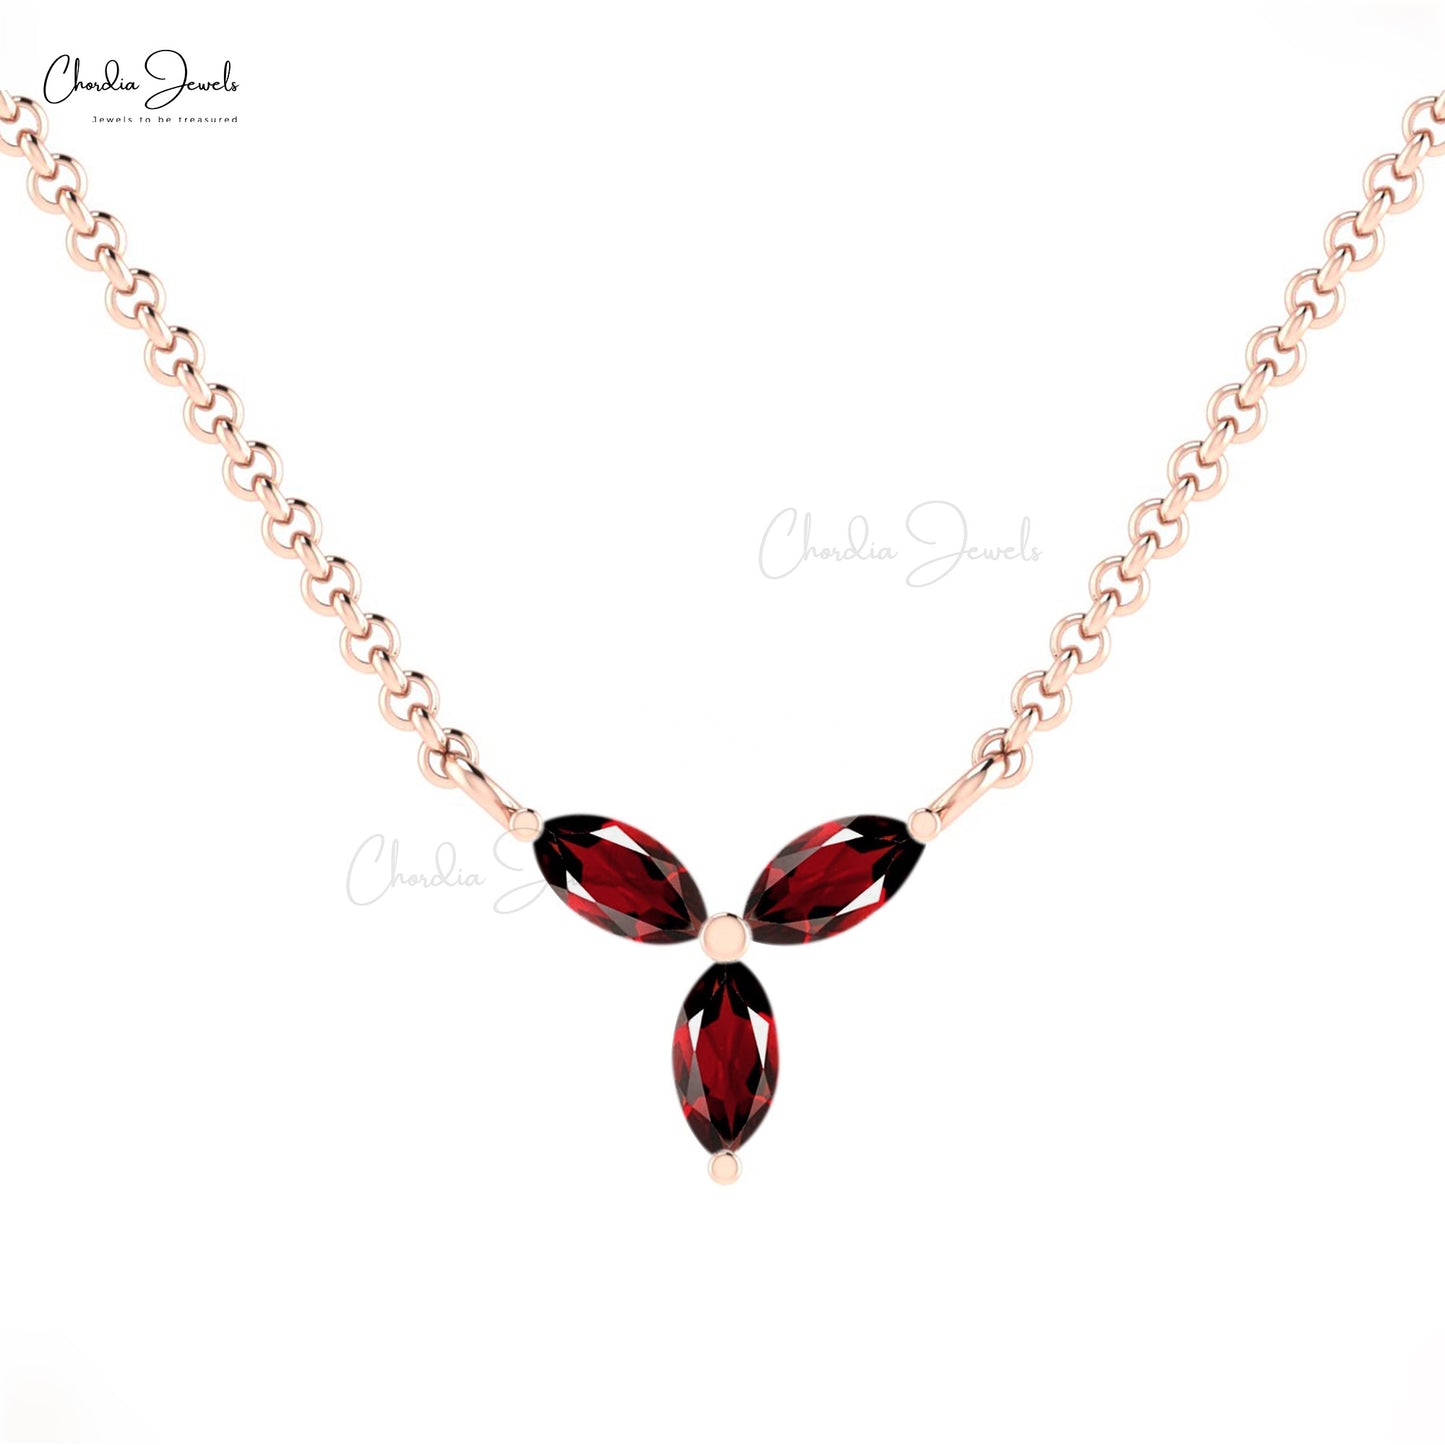 Exquisite Marquise Cut Genuine Red Garnet Necklace Pendant 4x2mm January Birthstone Gemstone Pendant in 14k Real Gold Engagement Gift For Her